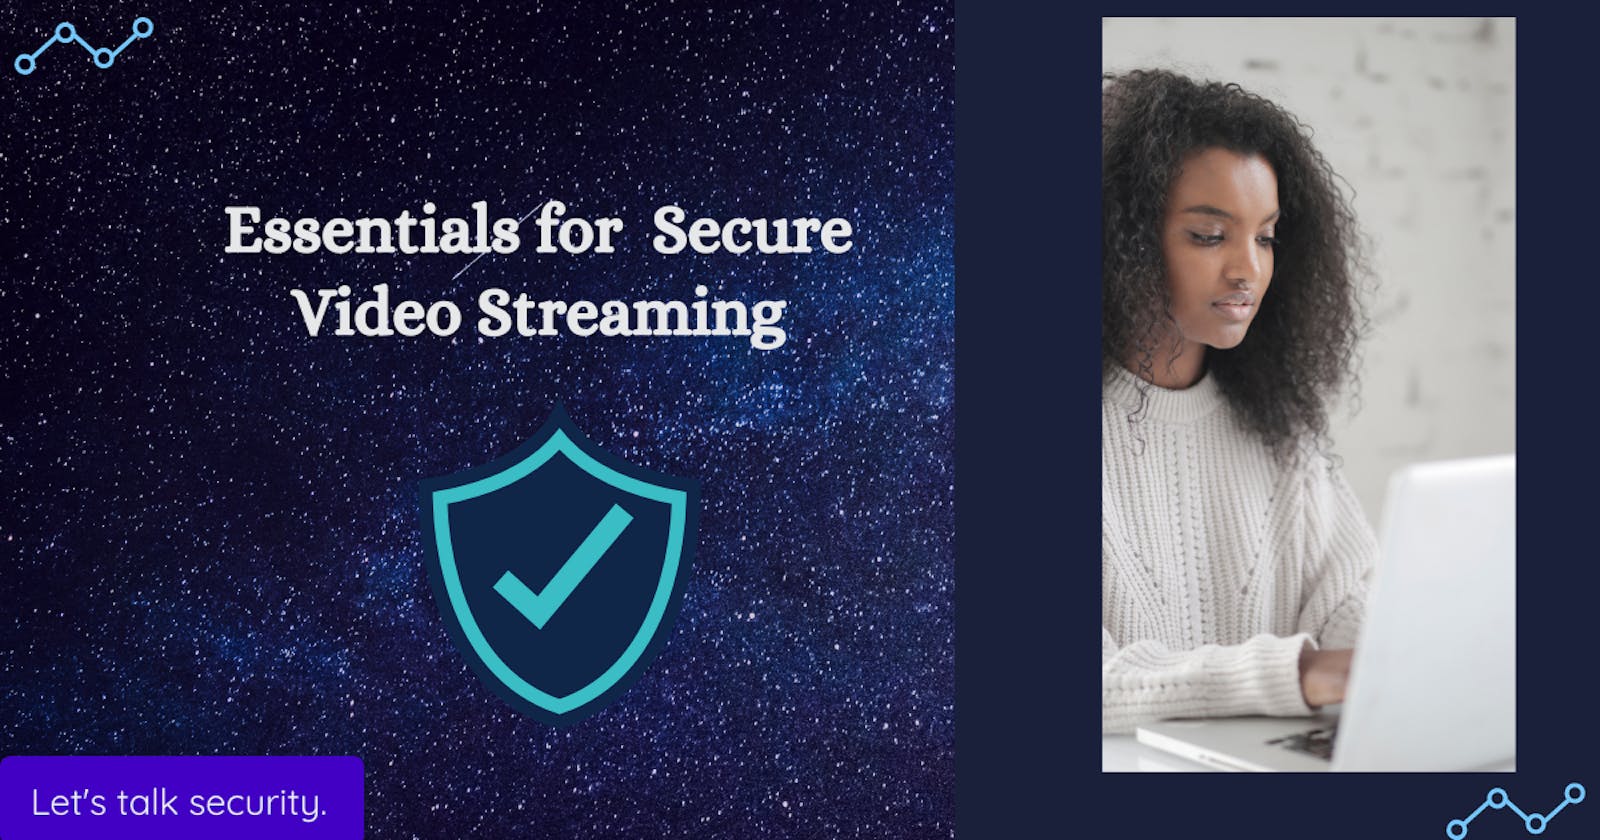 Essentials for Secure Video Streaming